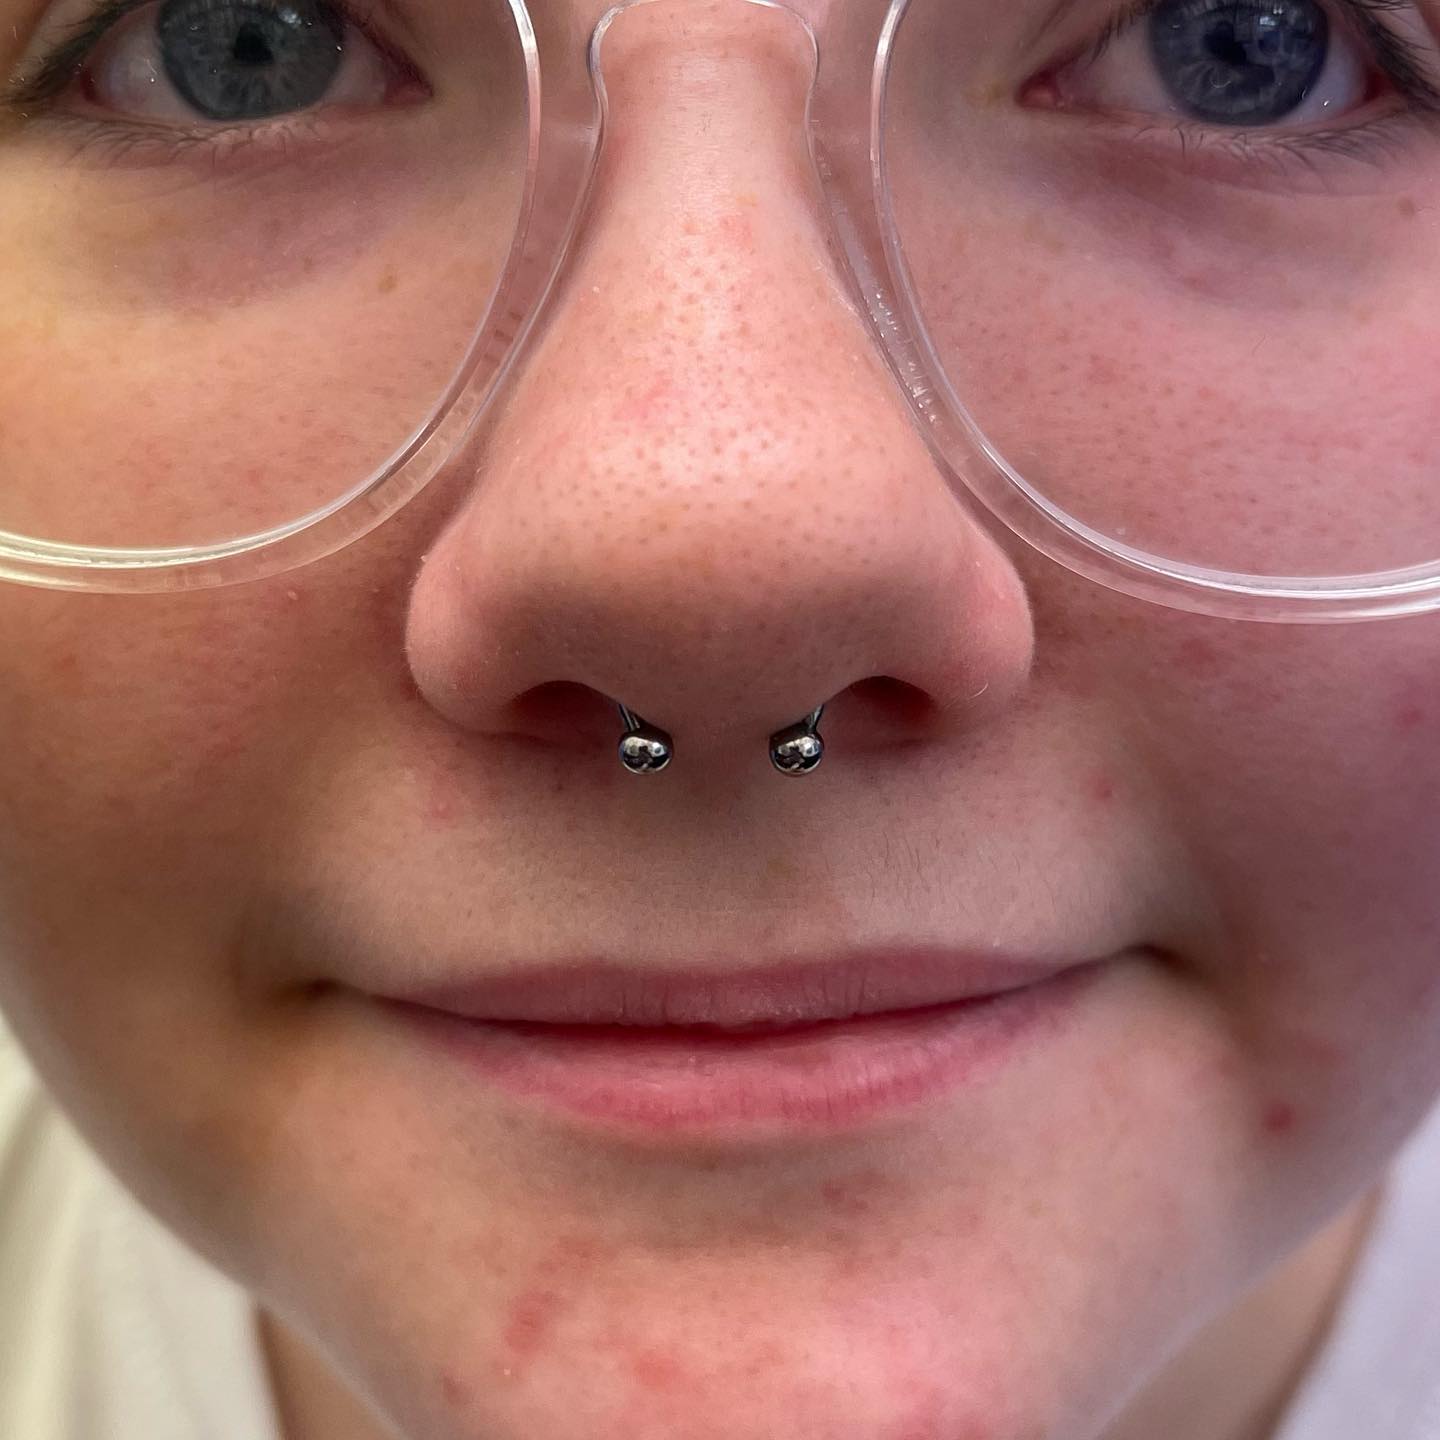 The most satisfying, tiny little septum for Brodie 🩷 Thank you for your trust! Some clients are just MADE for septum piercings!

Pierced at Studio XIII 🌿

